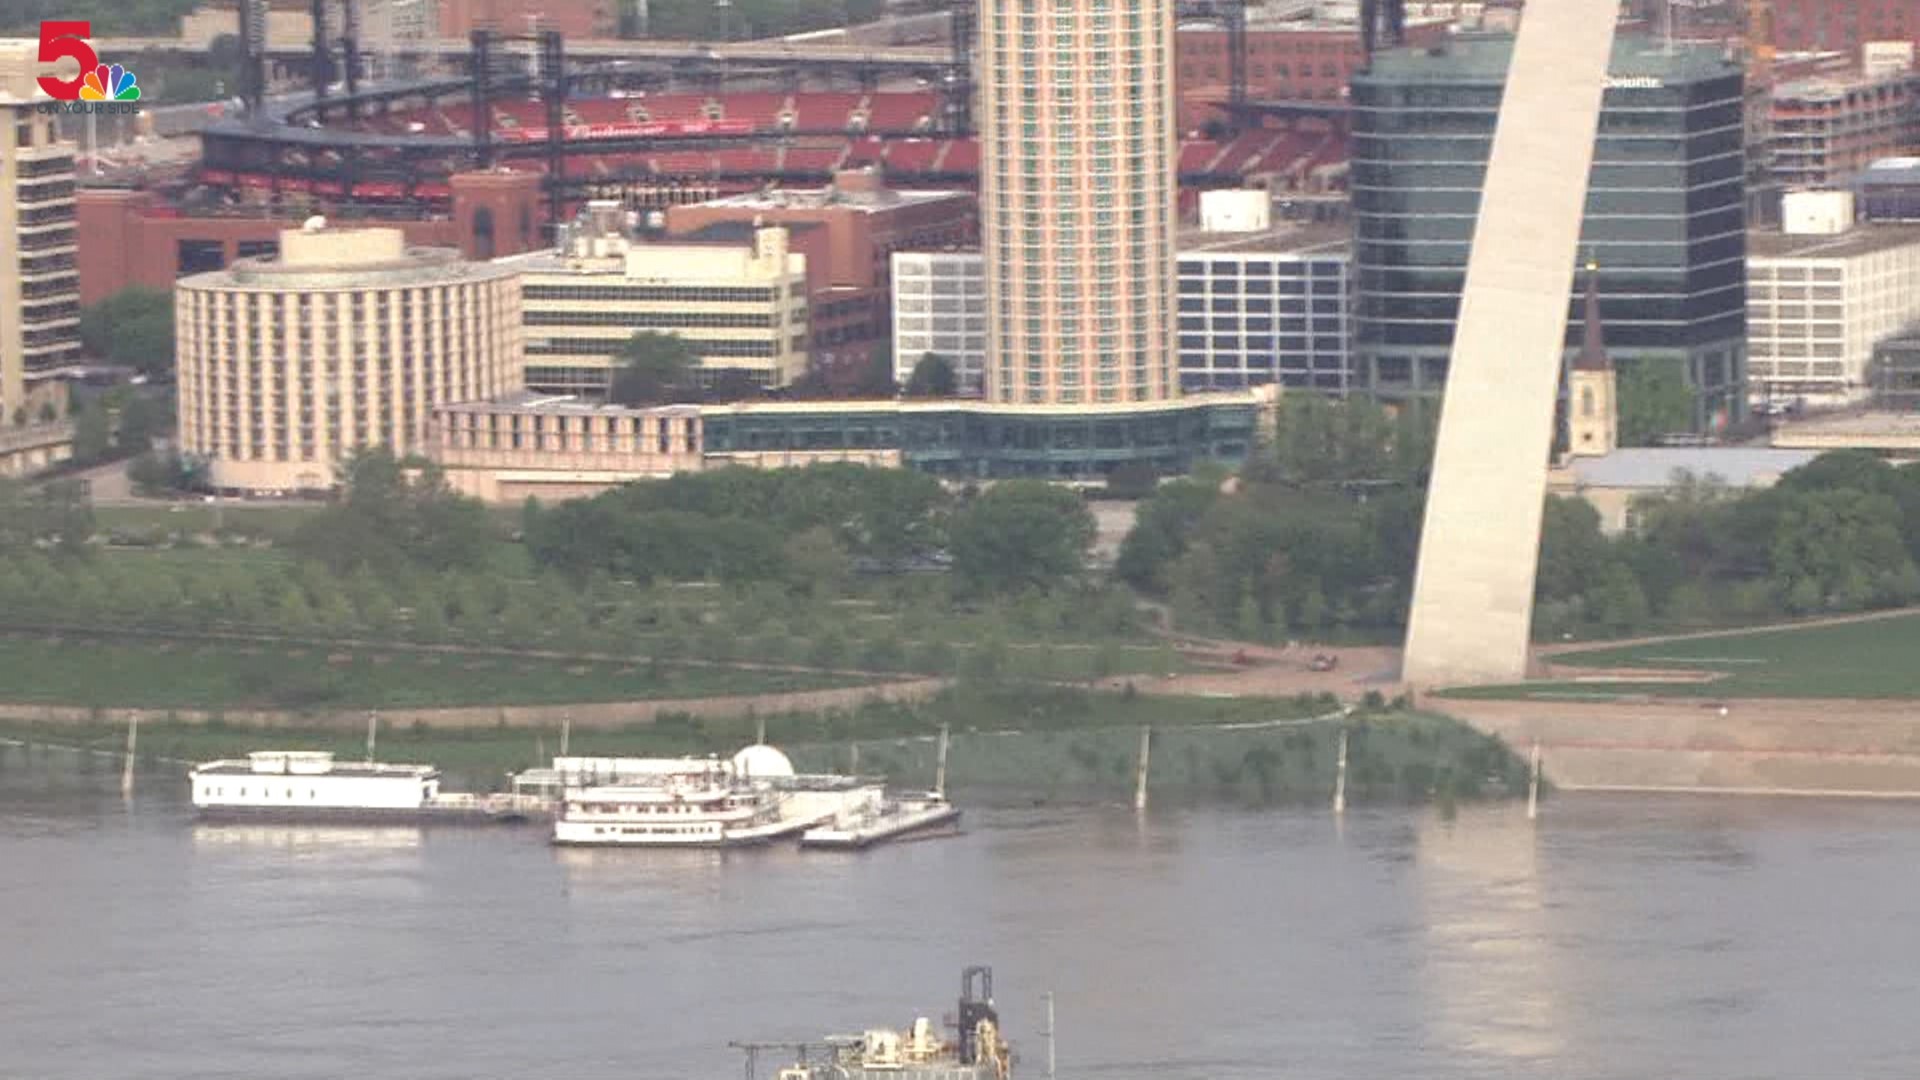 Sky5 captured the rising Mississippi River along the St. Louis waterfront. The river is expected to crest Monday at 41.6 feet.